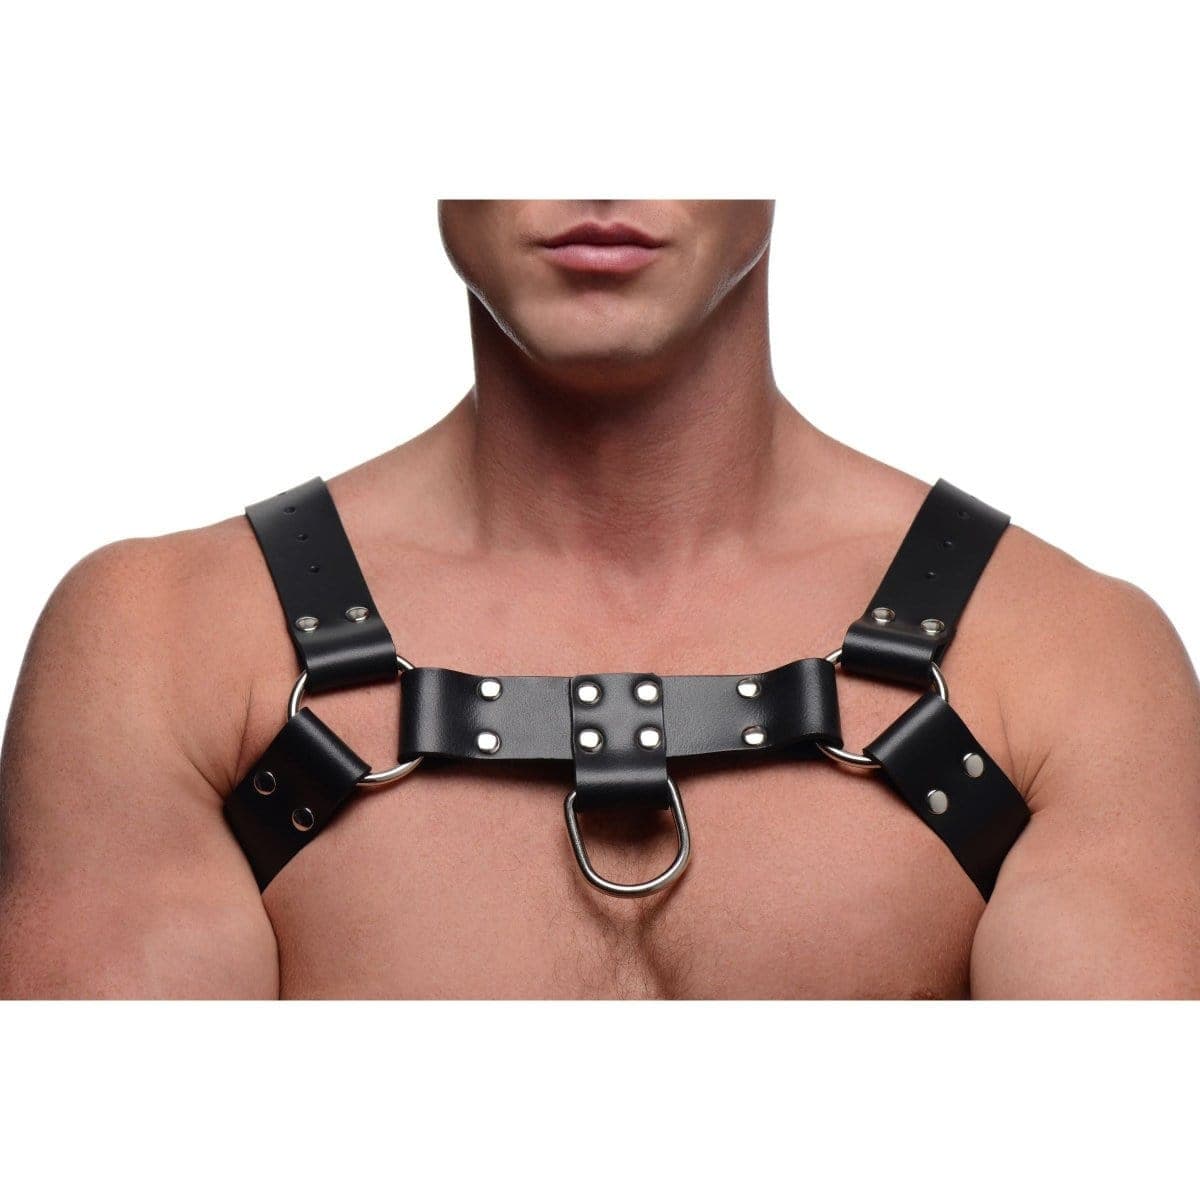 Strict Leather Harness English Bull Dog Harness With Cock Strap at the Haus of Shag